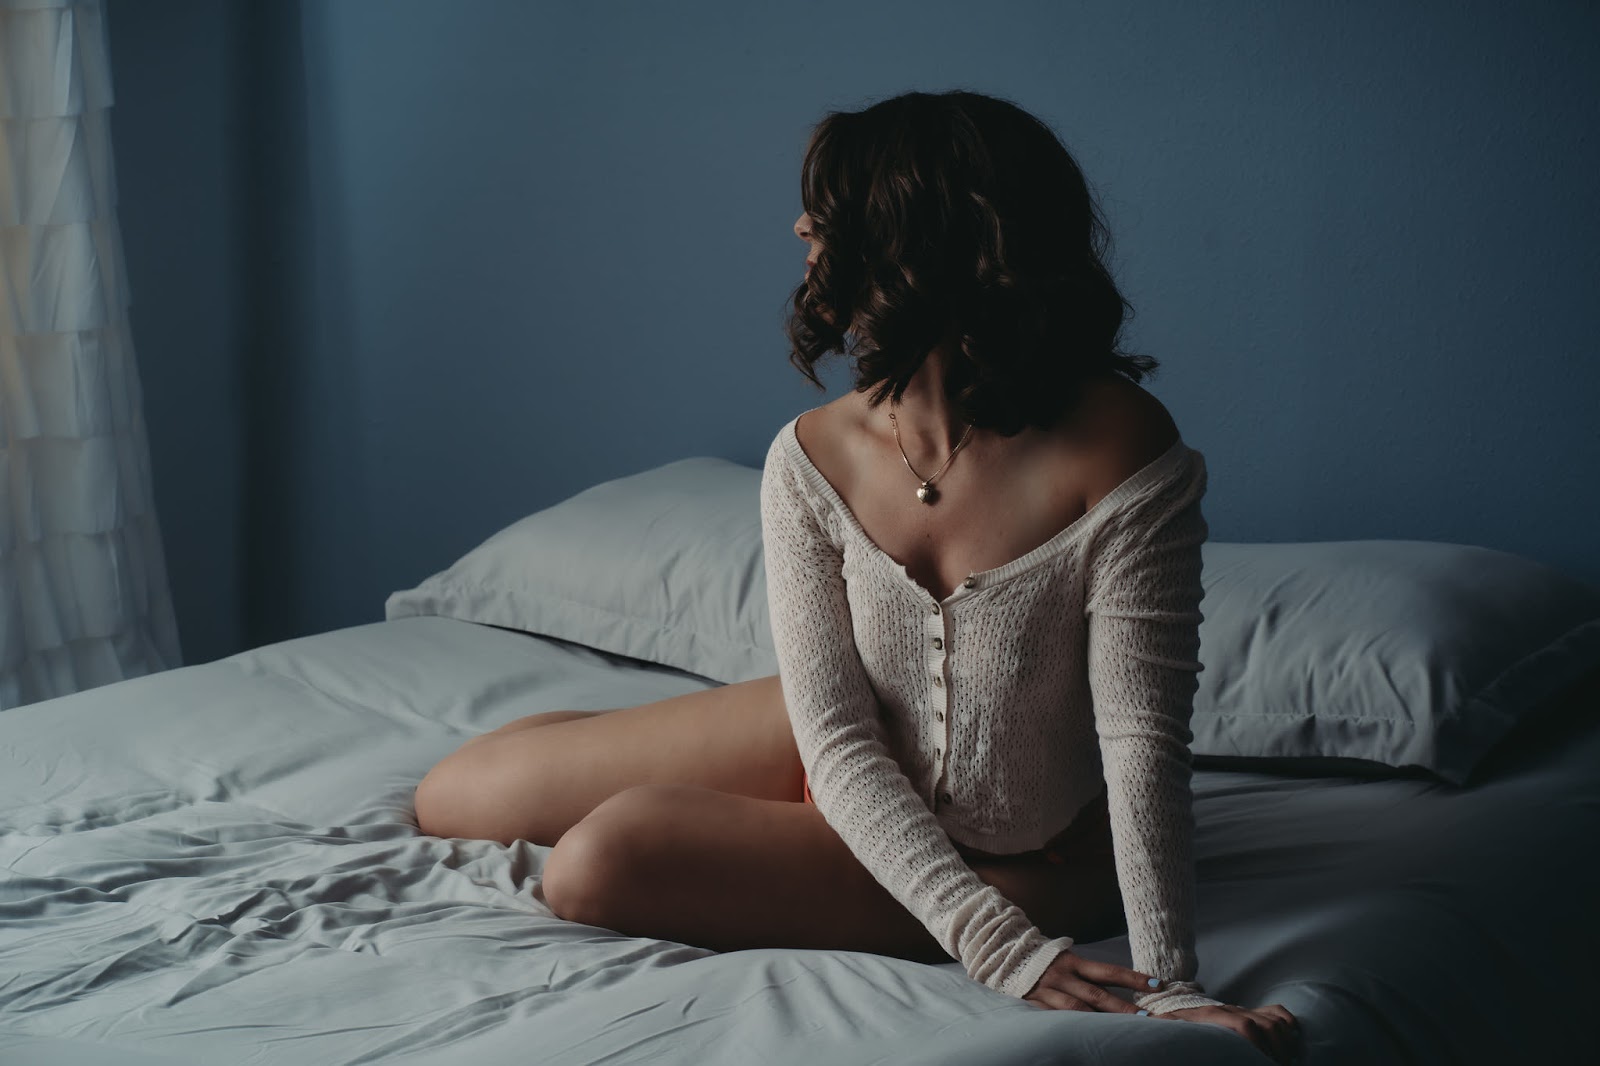 A woman sits on a bed, wearing a gold heart locket and a lacy cardigan that reveals her collarbones and shoulders. Photo by Embodied Art Boudoir. Classic boudoir photography, classic photography, classic boudoir, classy boudoir, classy photography, colorado boudoir, denver boudoir, boulder boudoir, colorado springs boudoir, boudoir ideas, boudoir poses, boudoir inspiration, photography inspiration, boudoir session, boudoir photos